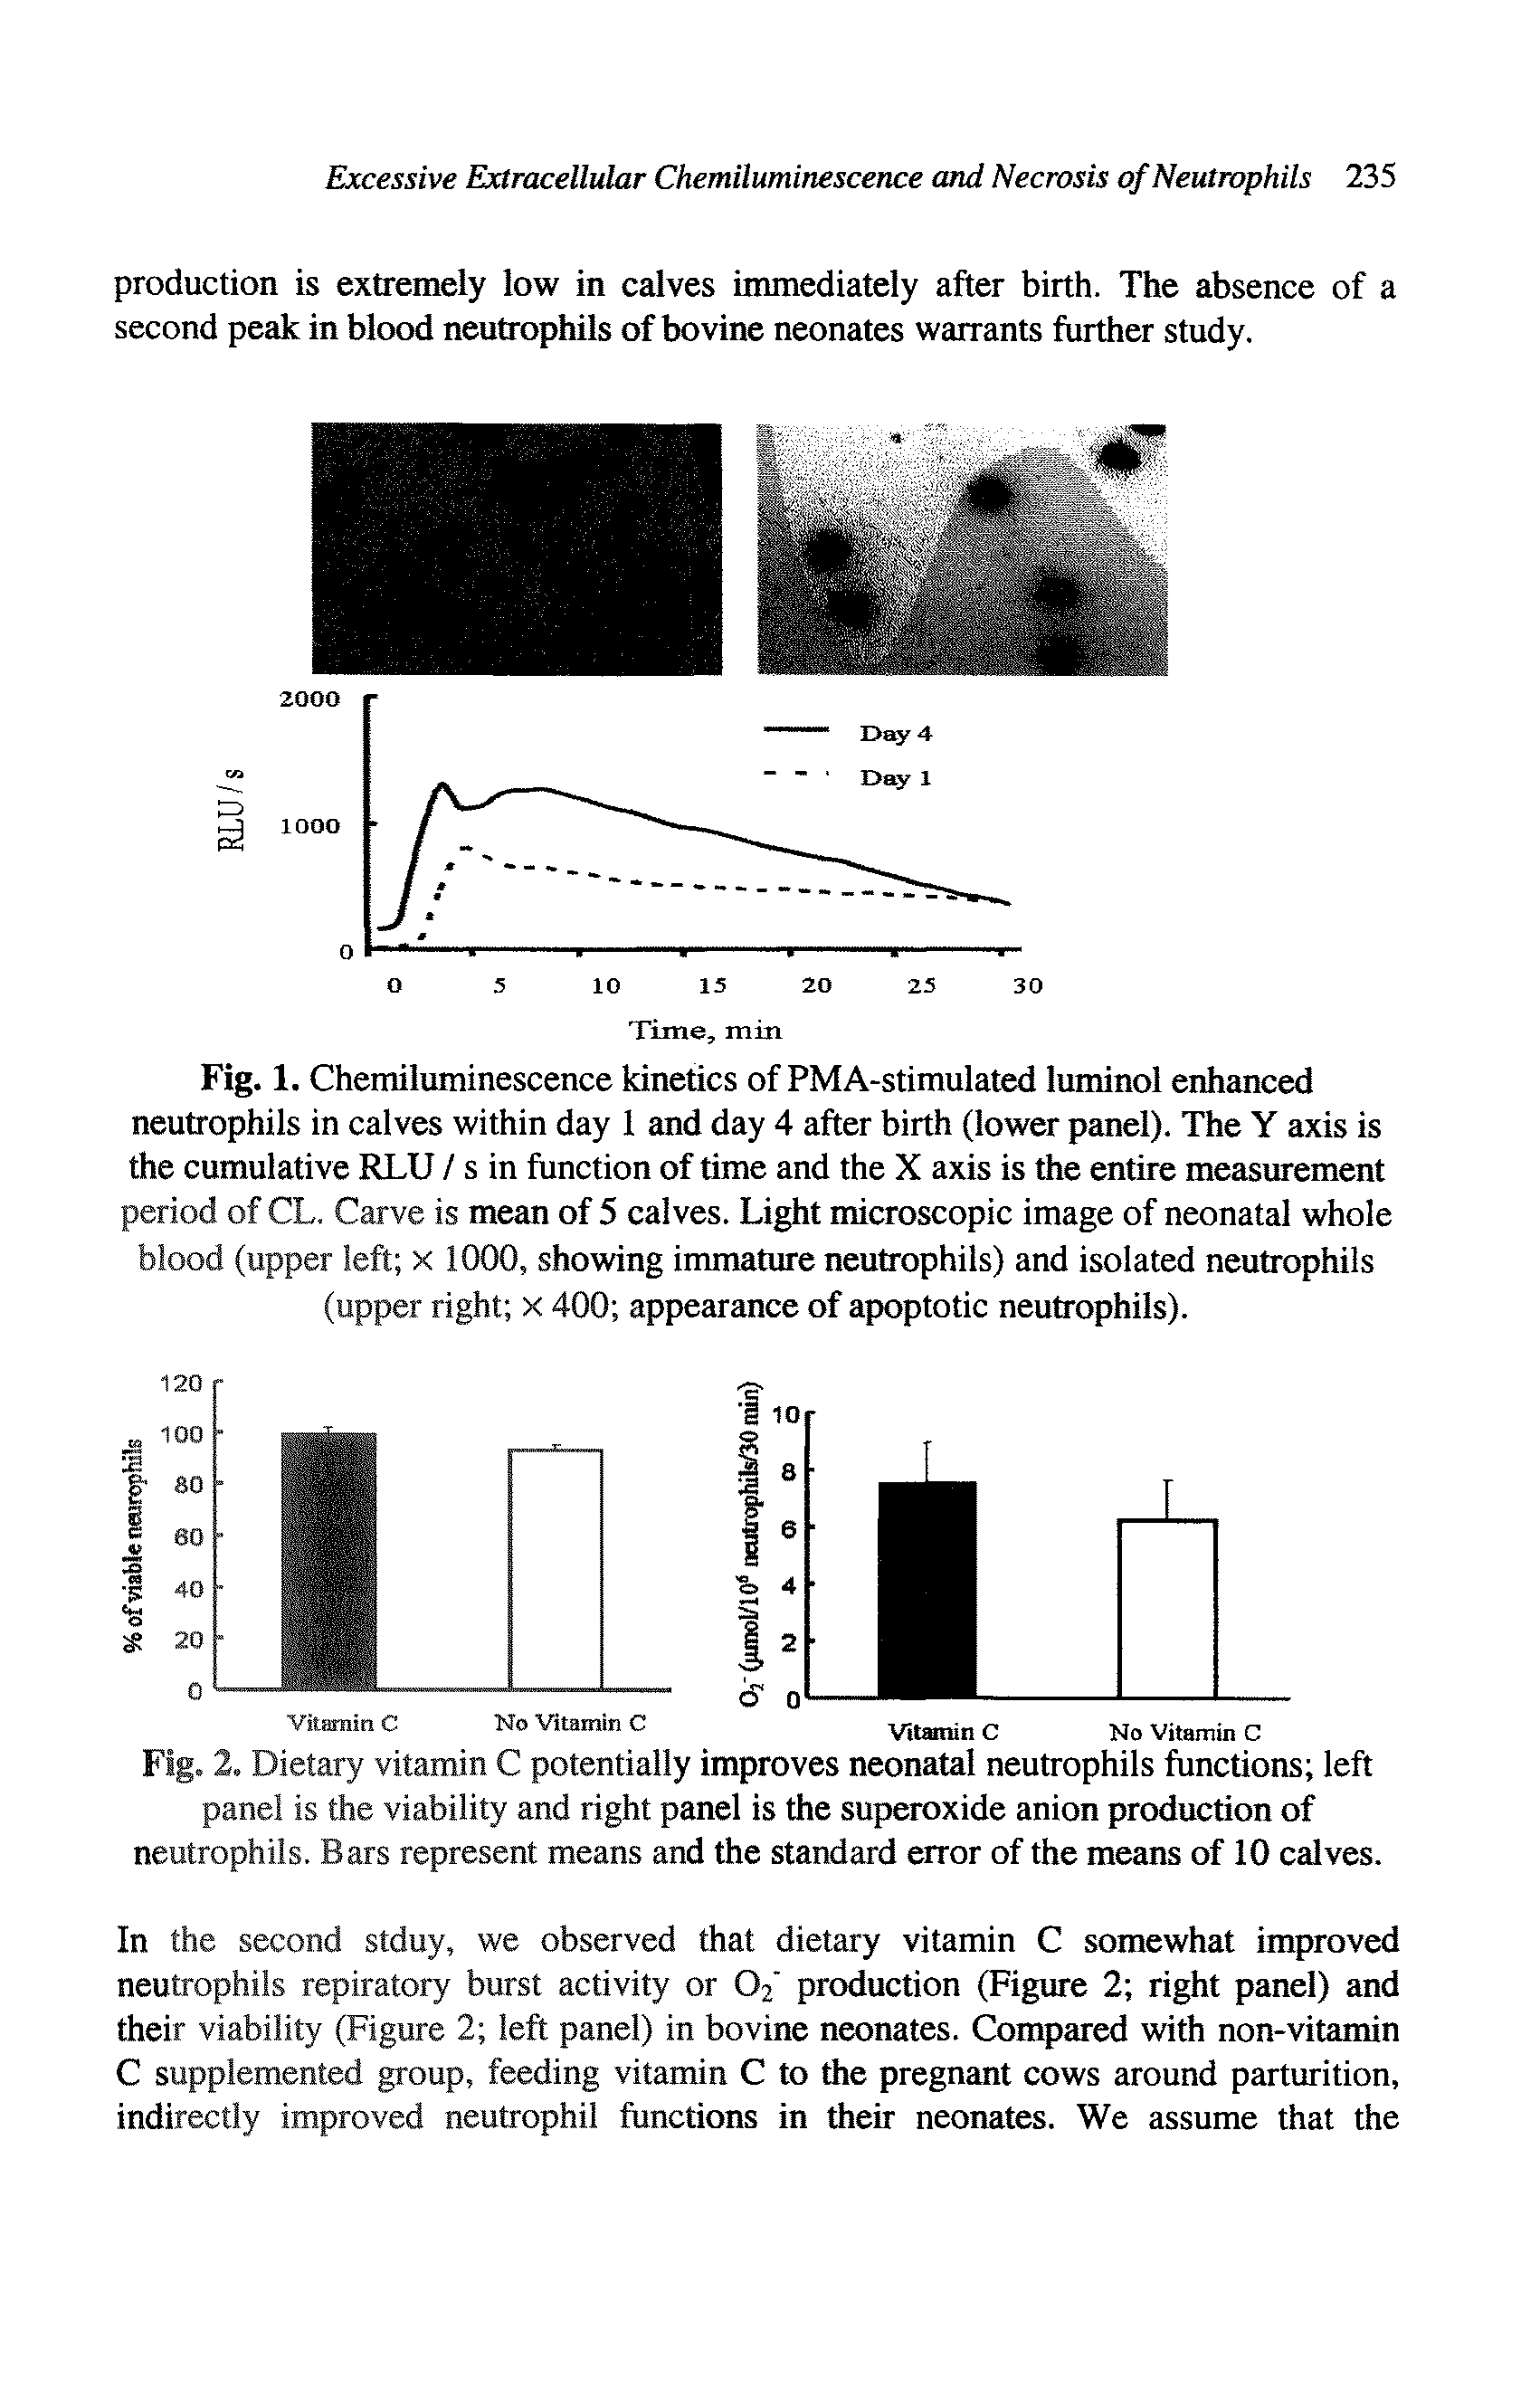 Fig. 1. Chemiluminescence kinetics of PMA-stimulated luminol enhanced neutrophils in calves within day 1 and day 4 after birth (lower panel). The Y axis is the cumulative RLU / s in function of time and the X axis is the entire measurement period of CL. Carve is mean of 5 calves. Light microscopic image of neonatal whole blood (upper left x 1000, showing immature neutrophils) and isolated neutrophils (upper right x 400 appearance of apoptotic neutrophils).